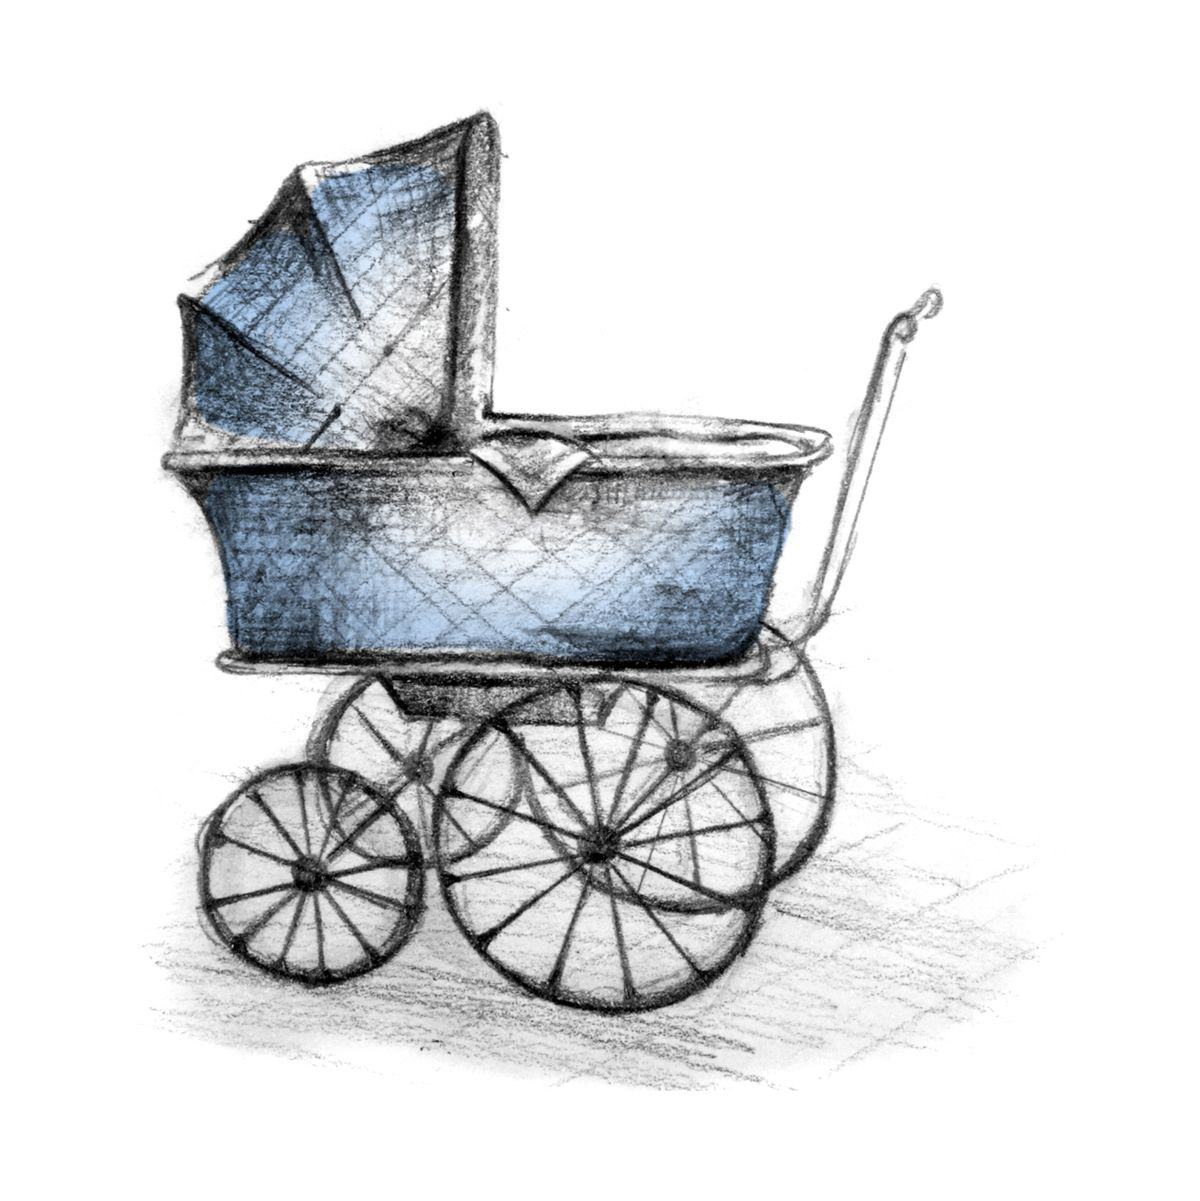 old fashioned baby prams